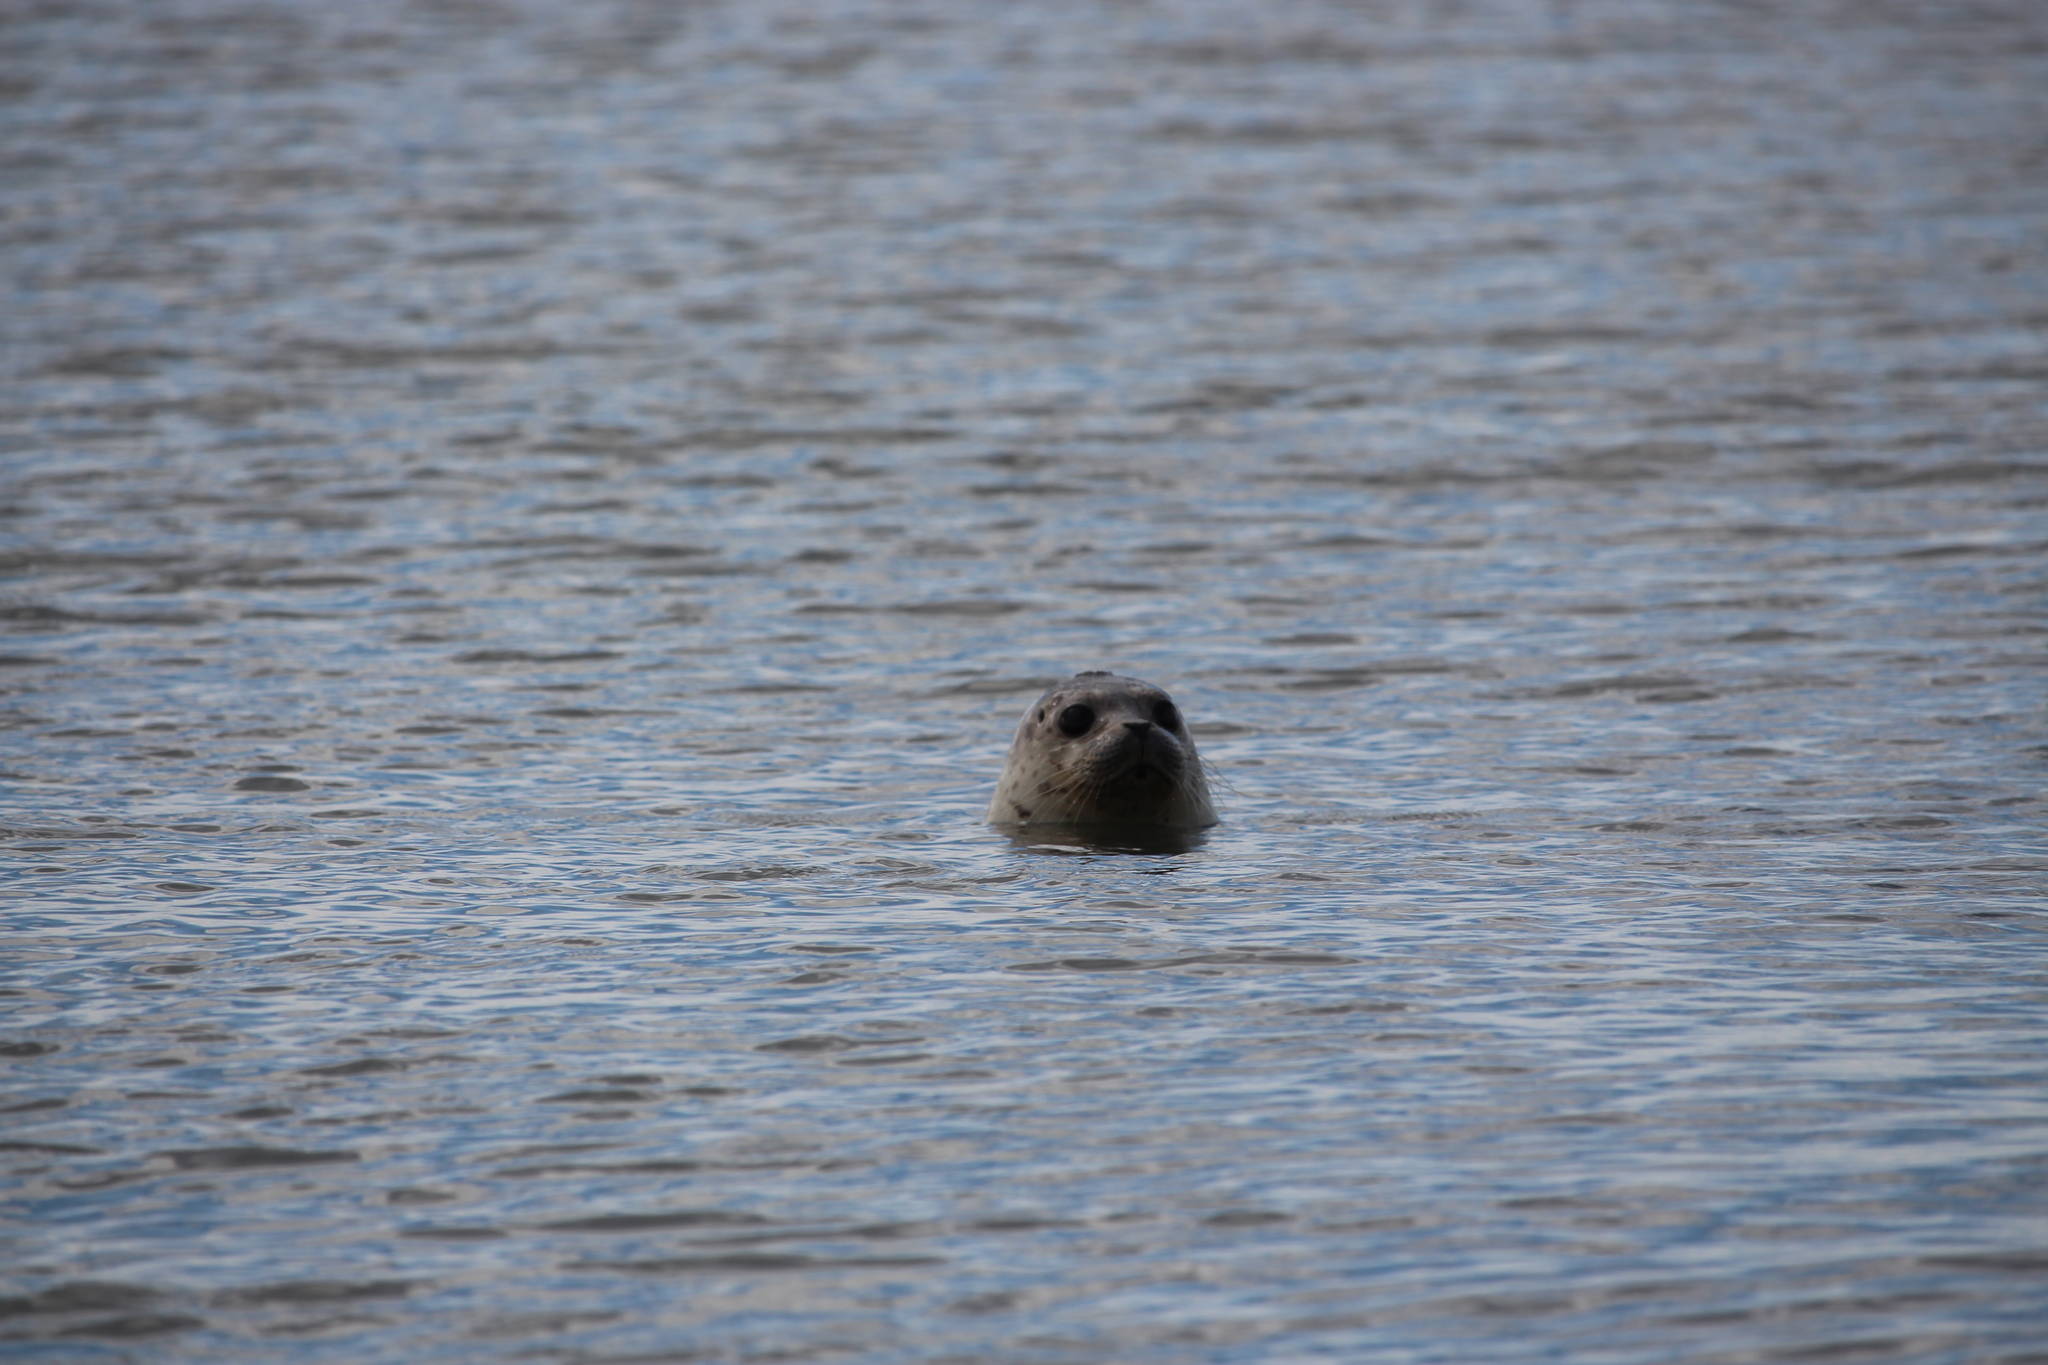 A harbor seal enjoys the waters of Cook Inlet after being released by staff from the Alaska SeaLife Center at the Kenai Beach on Aug. 27, 2020. (Photo by Brian Mazurek/Peninsula Clarion)